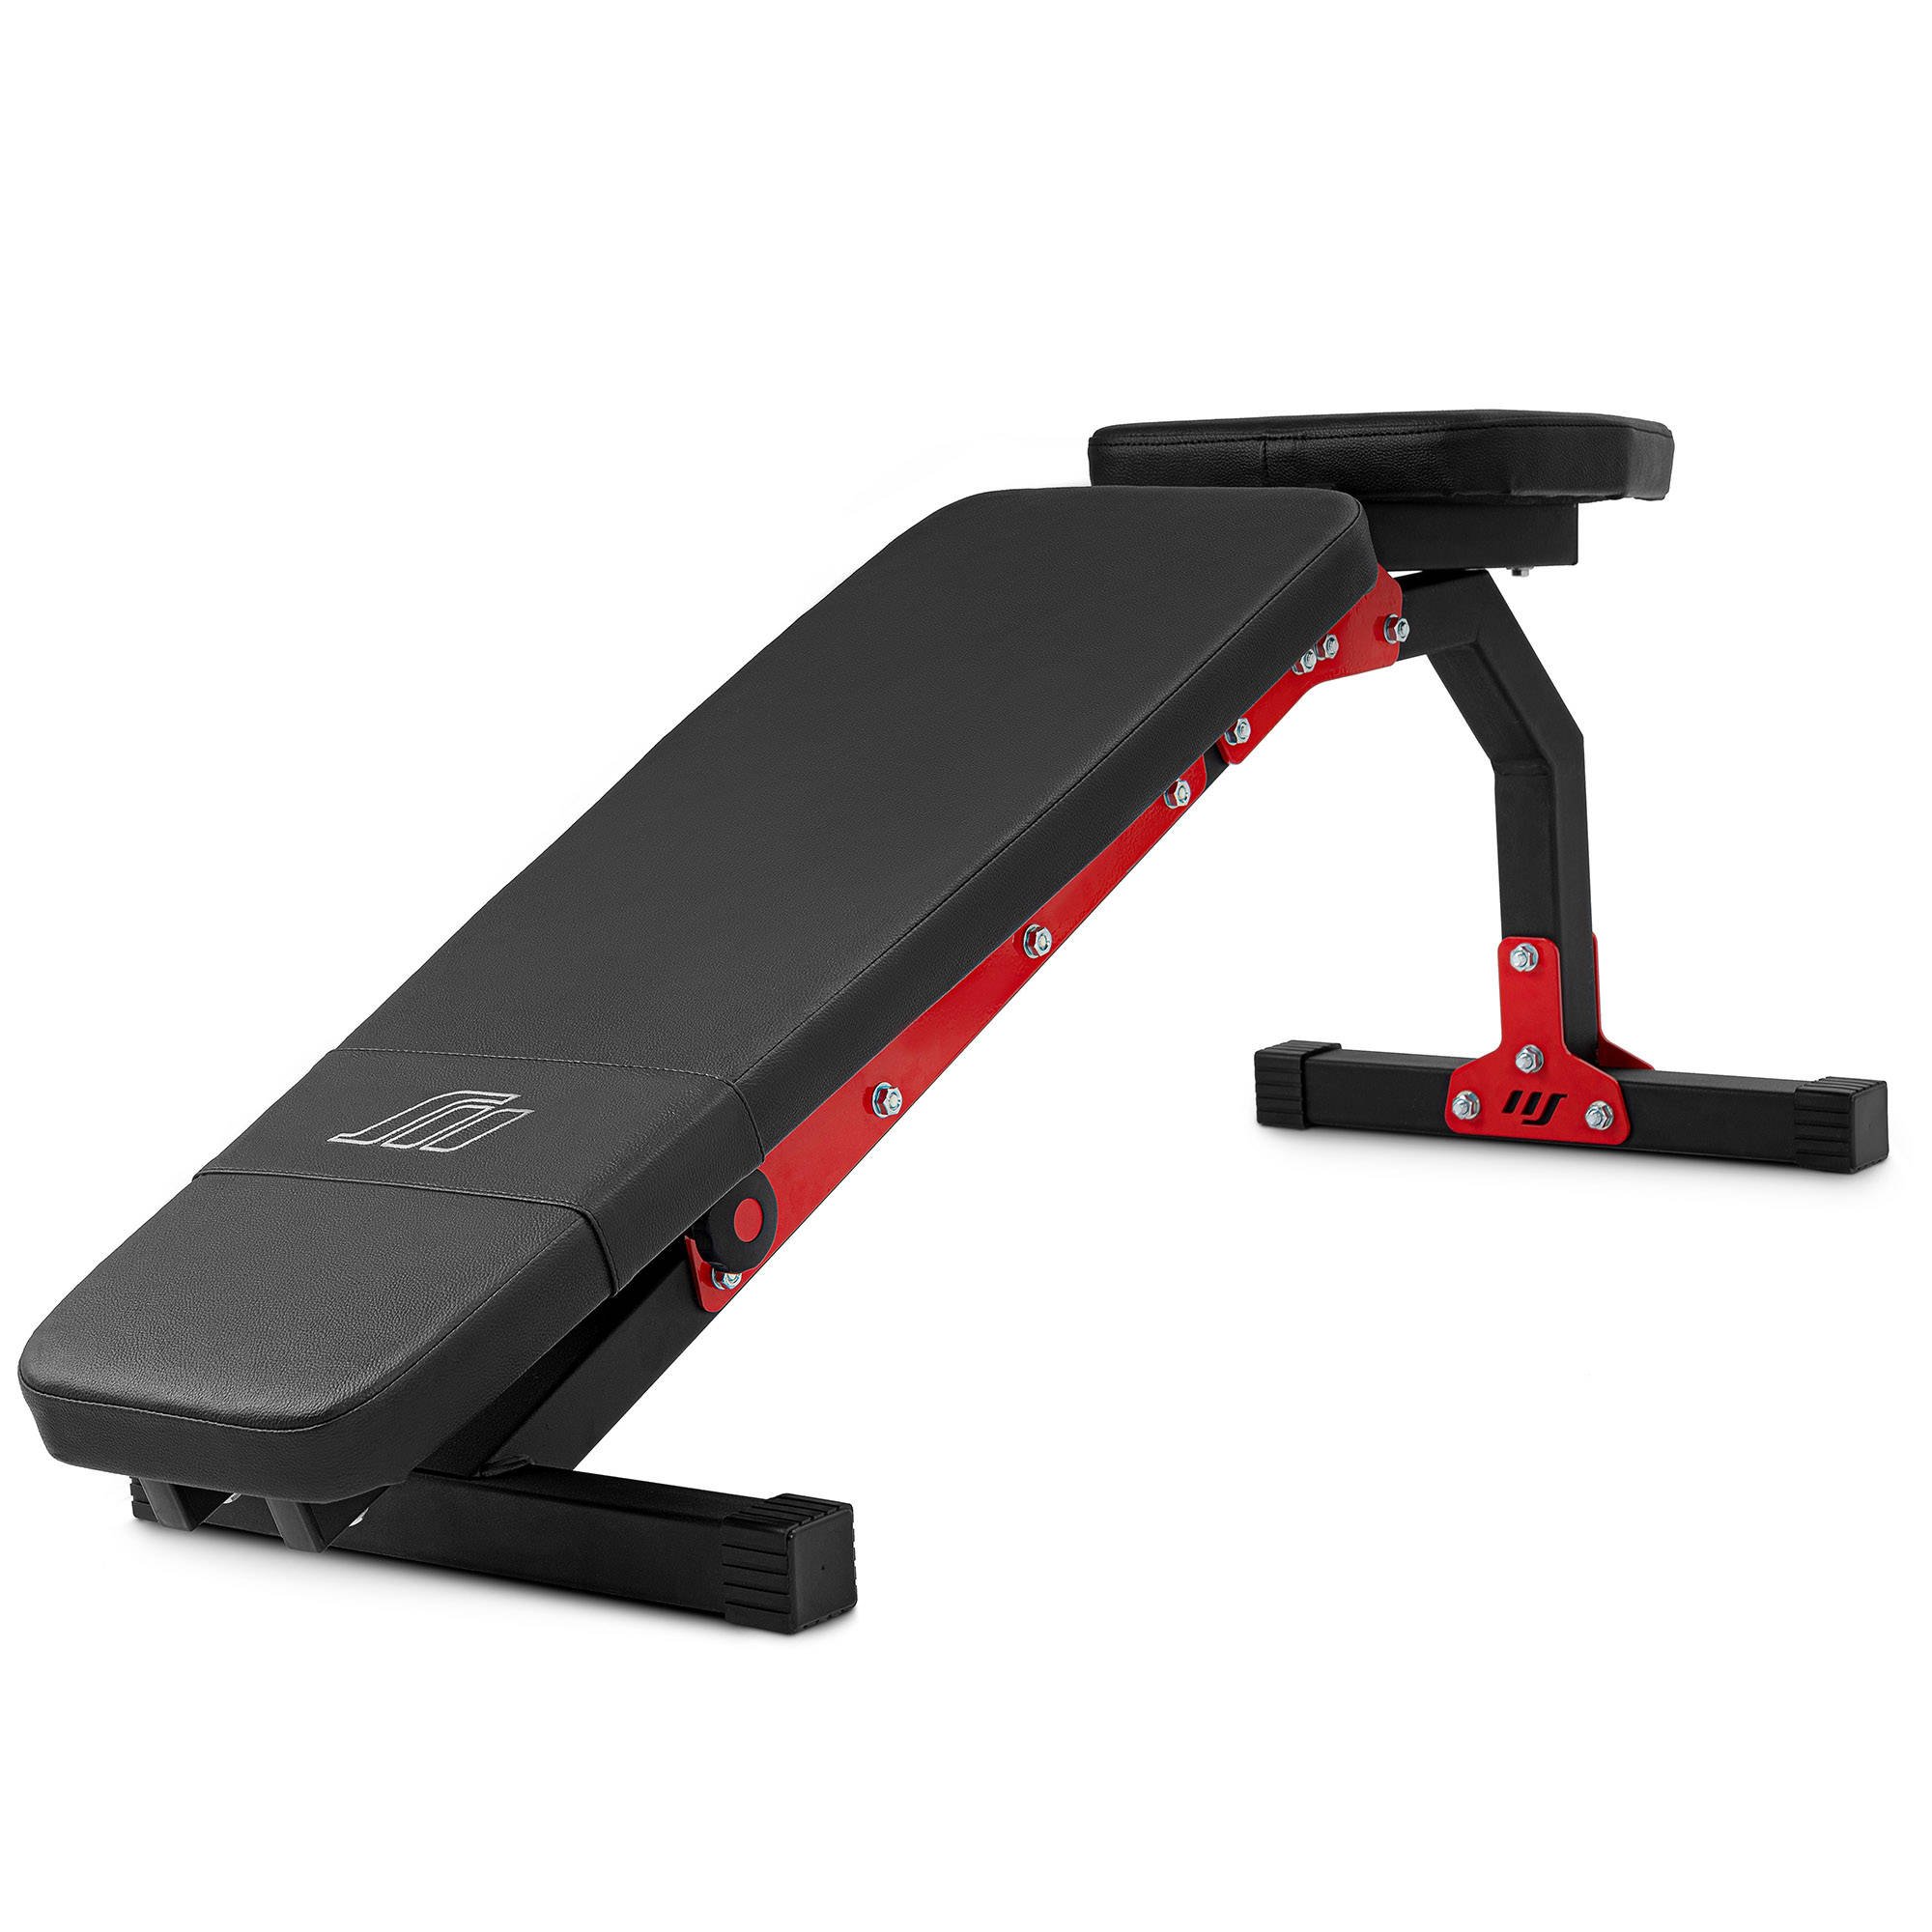 Double-sided adjustable bench MH-L114 2.0 - Marbo Sport